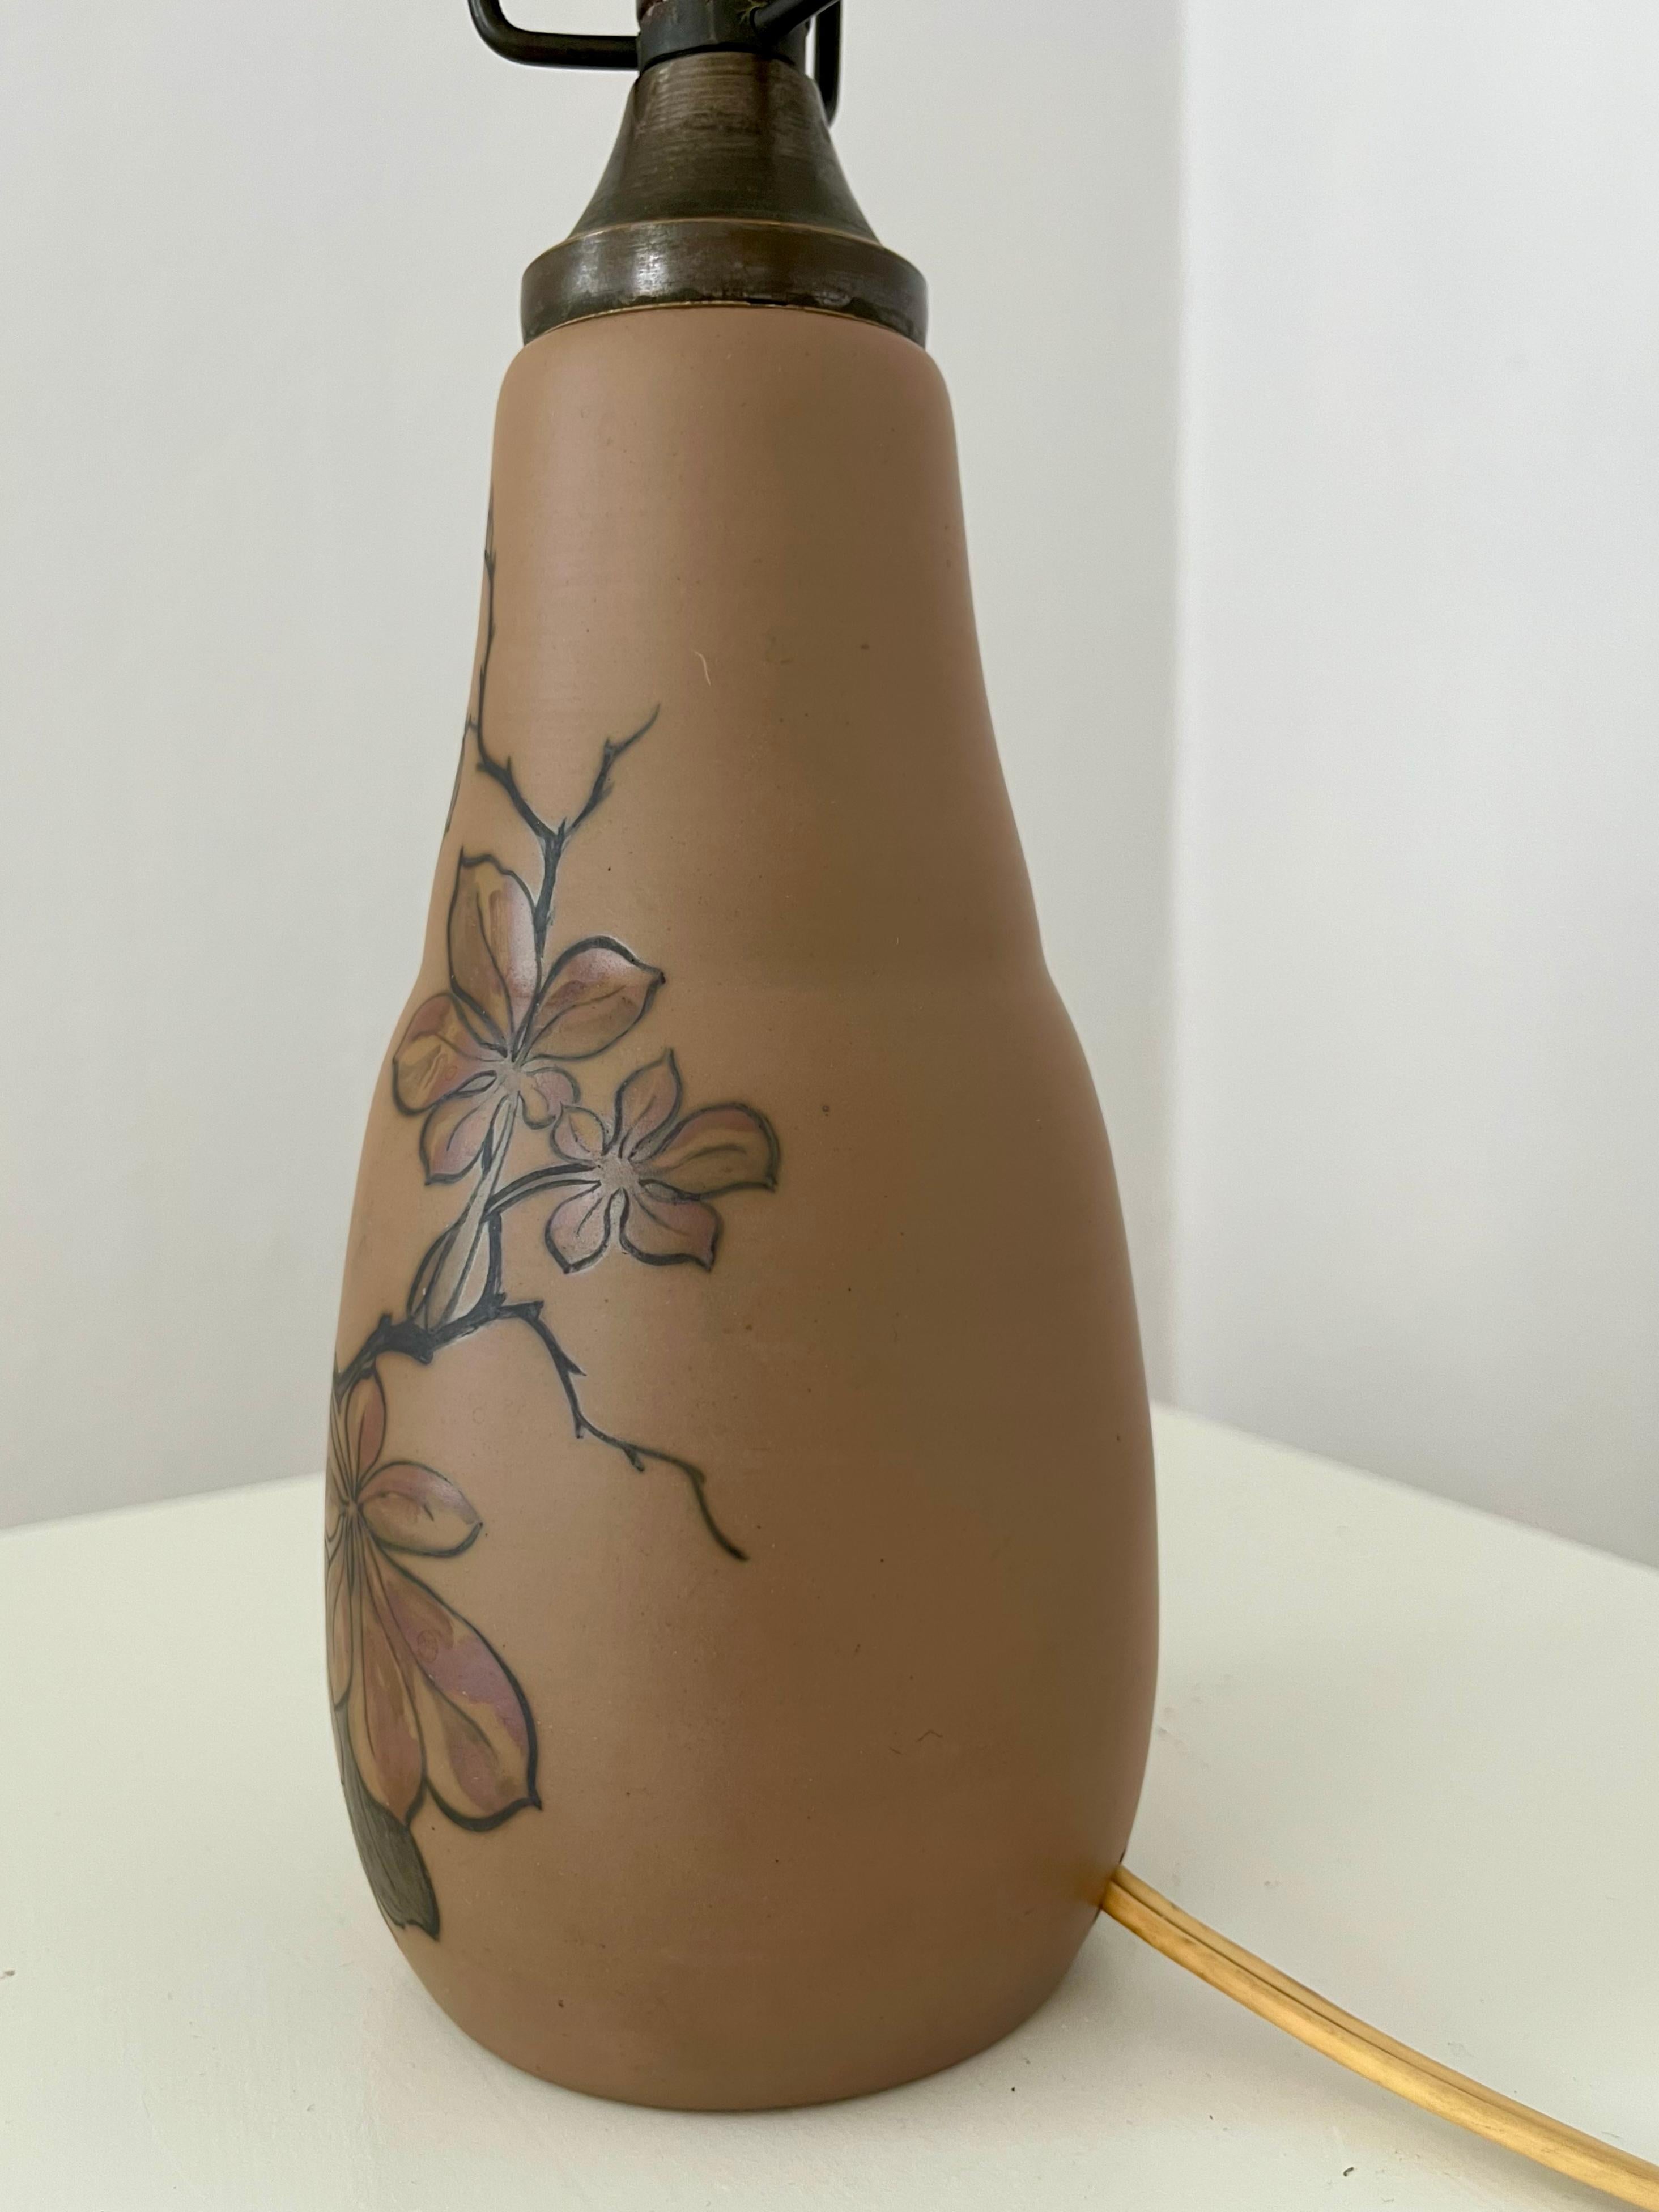 1930s Danish art nouveau ceramic hand decorated table lamp by L. Hjort In Good Condition For Sale In Frederiksberg C, DK